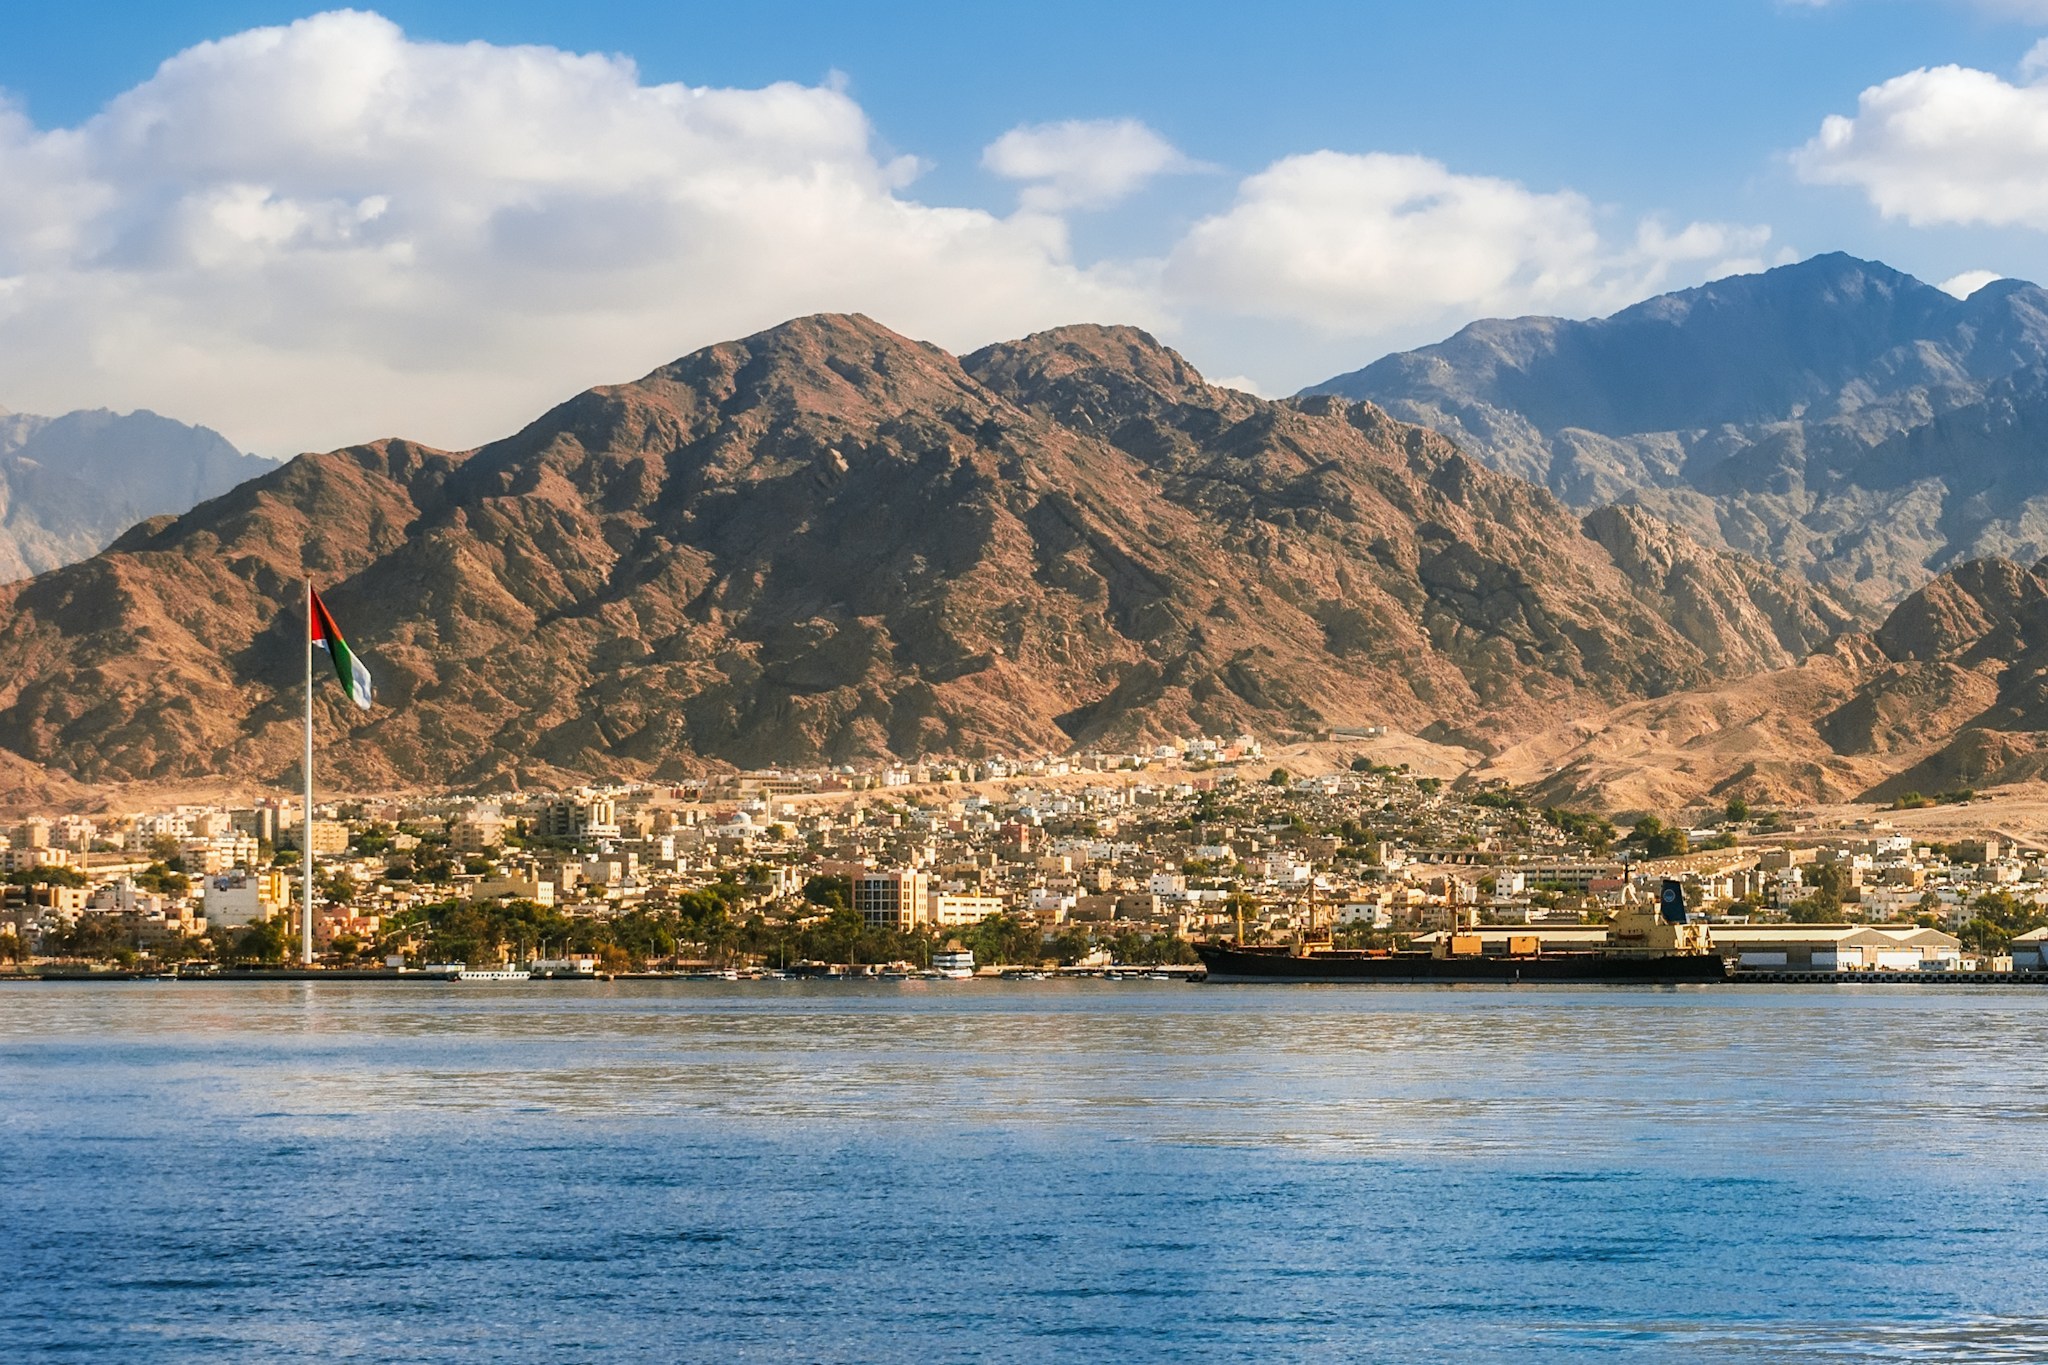 Aqaba at the Red Sea, Jordan

Canva - https://www.canva.com/photos/MADGCJcCcb8-view-on-the-aqaba-waterfront-and-aqaba-sea-port-jordan-from-the-red-sea/